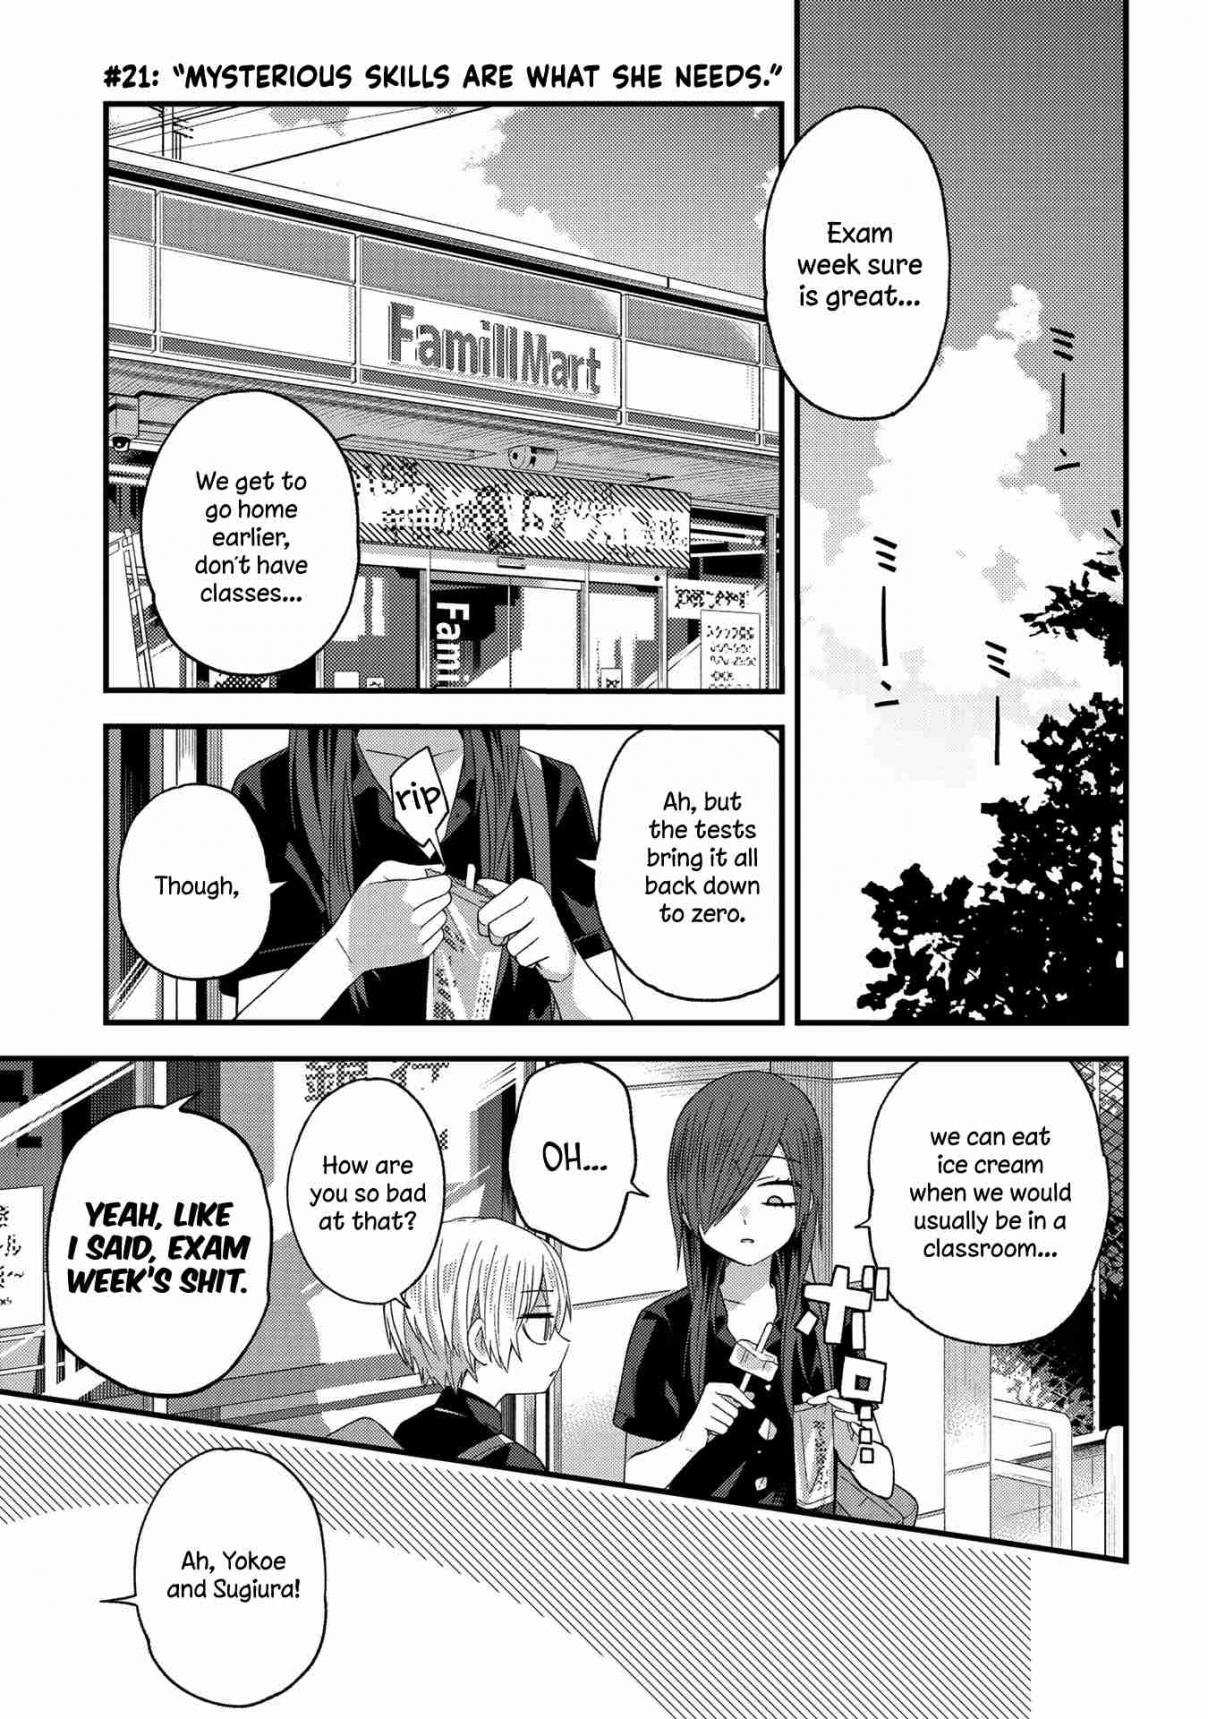 School Zone Vol. 1 Ch. 21 Mysterious skills are what she needs.